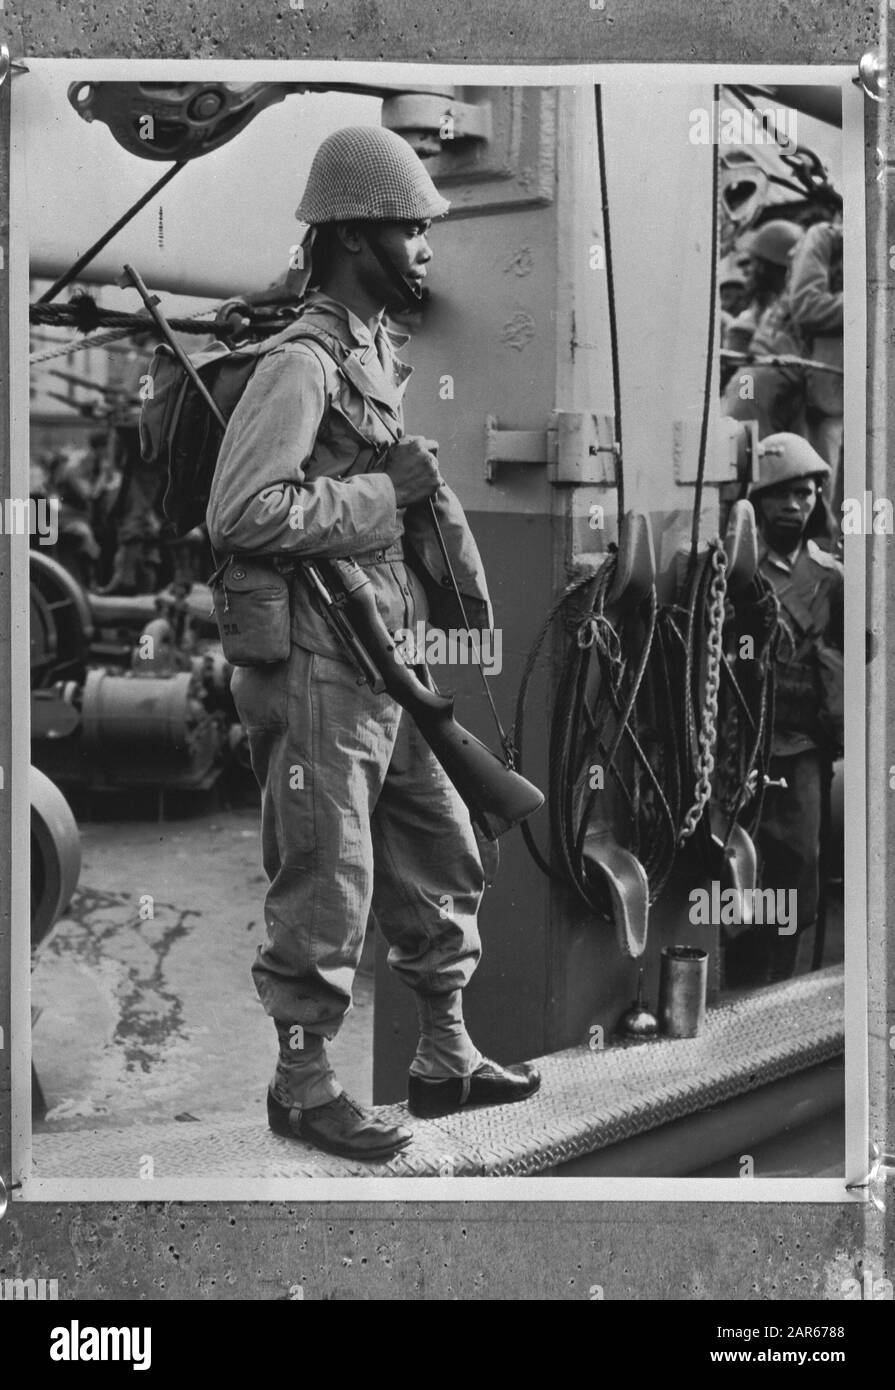 Royal Dutch Indian Army (KNIL), Australia. From Suriname, Dutch, Caribbean Indians, Creoles arrive along with Javanese and Hindu people. The contingent is called: West Indian forces of the KNIL Date: 1944 Location: Australia Keywords: army, soldiers, World War II Stock Photo